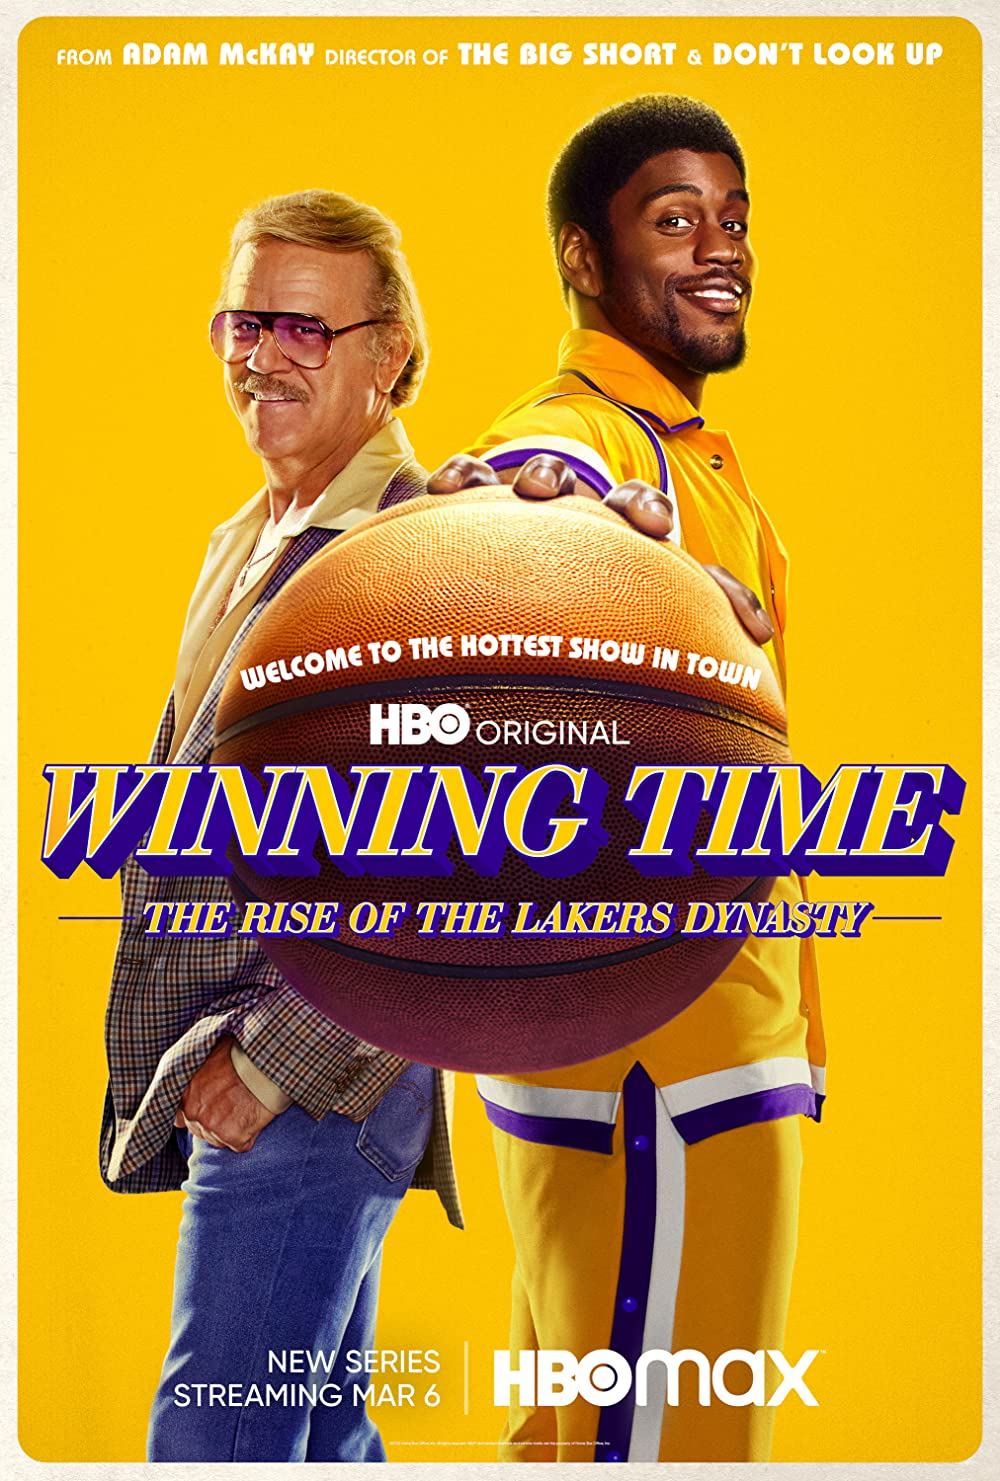 Inside the HBO series that deep dives into Lakers dynasty